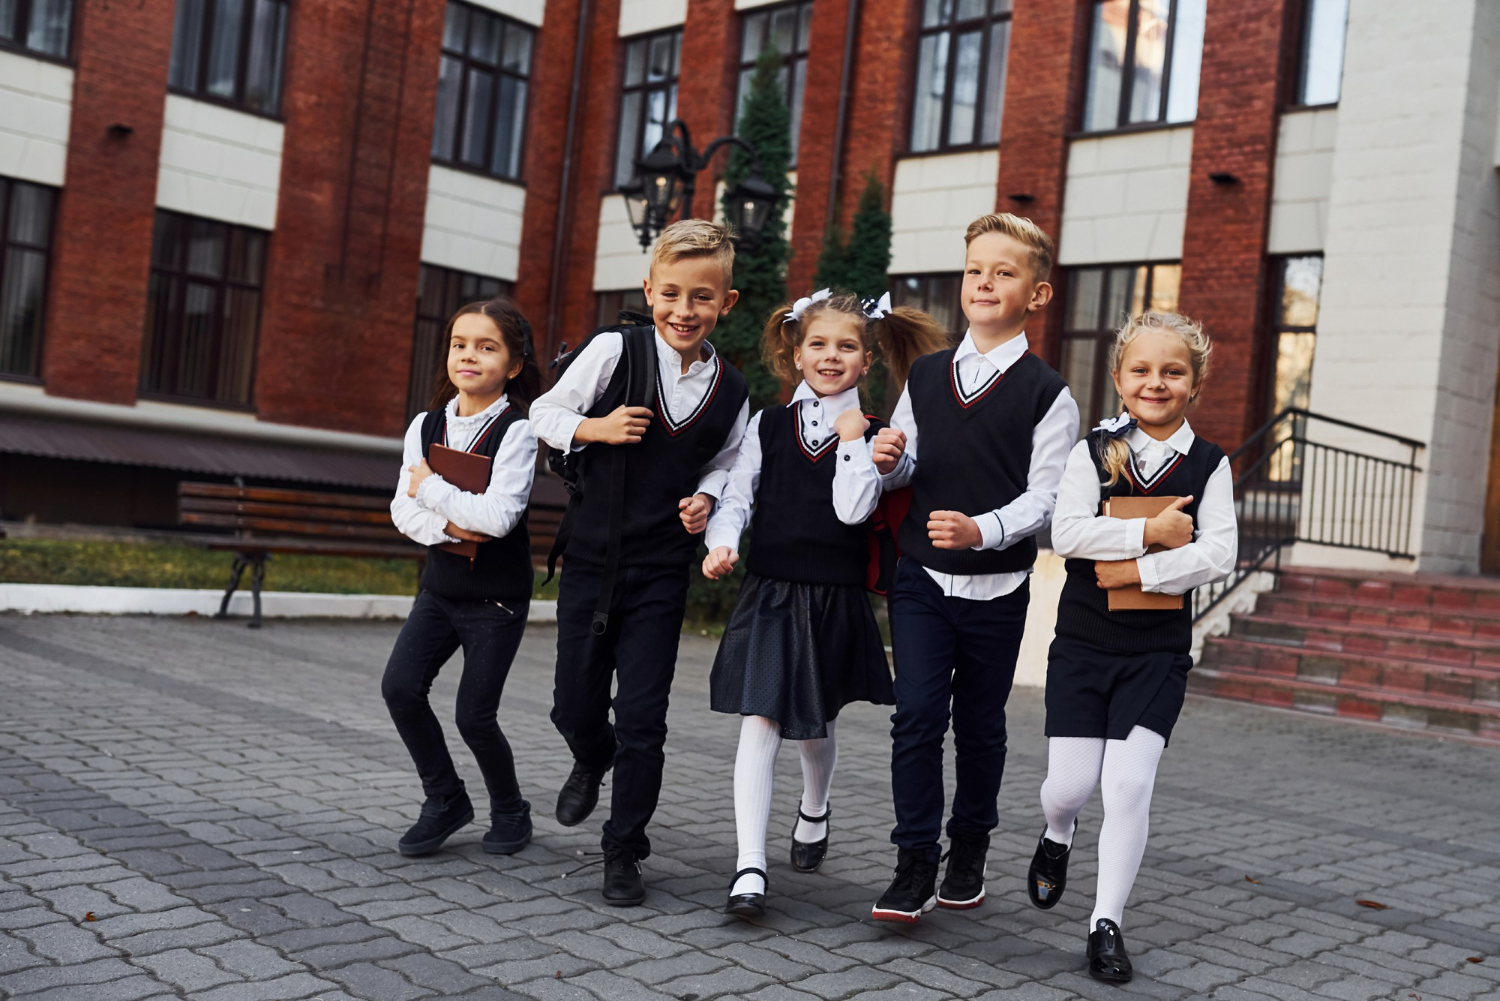 group-kids-school-uniform-posing-camera-outdoors-together-near-education-building